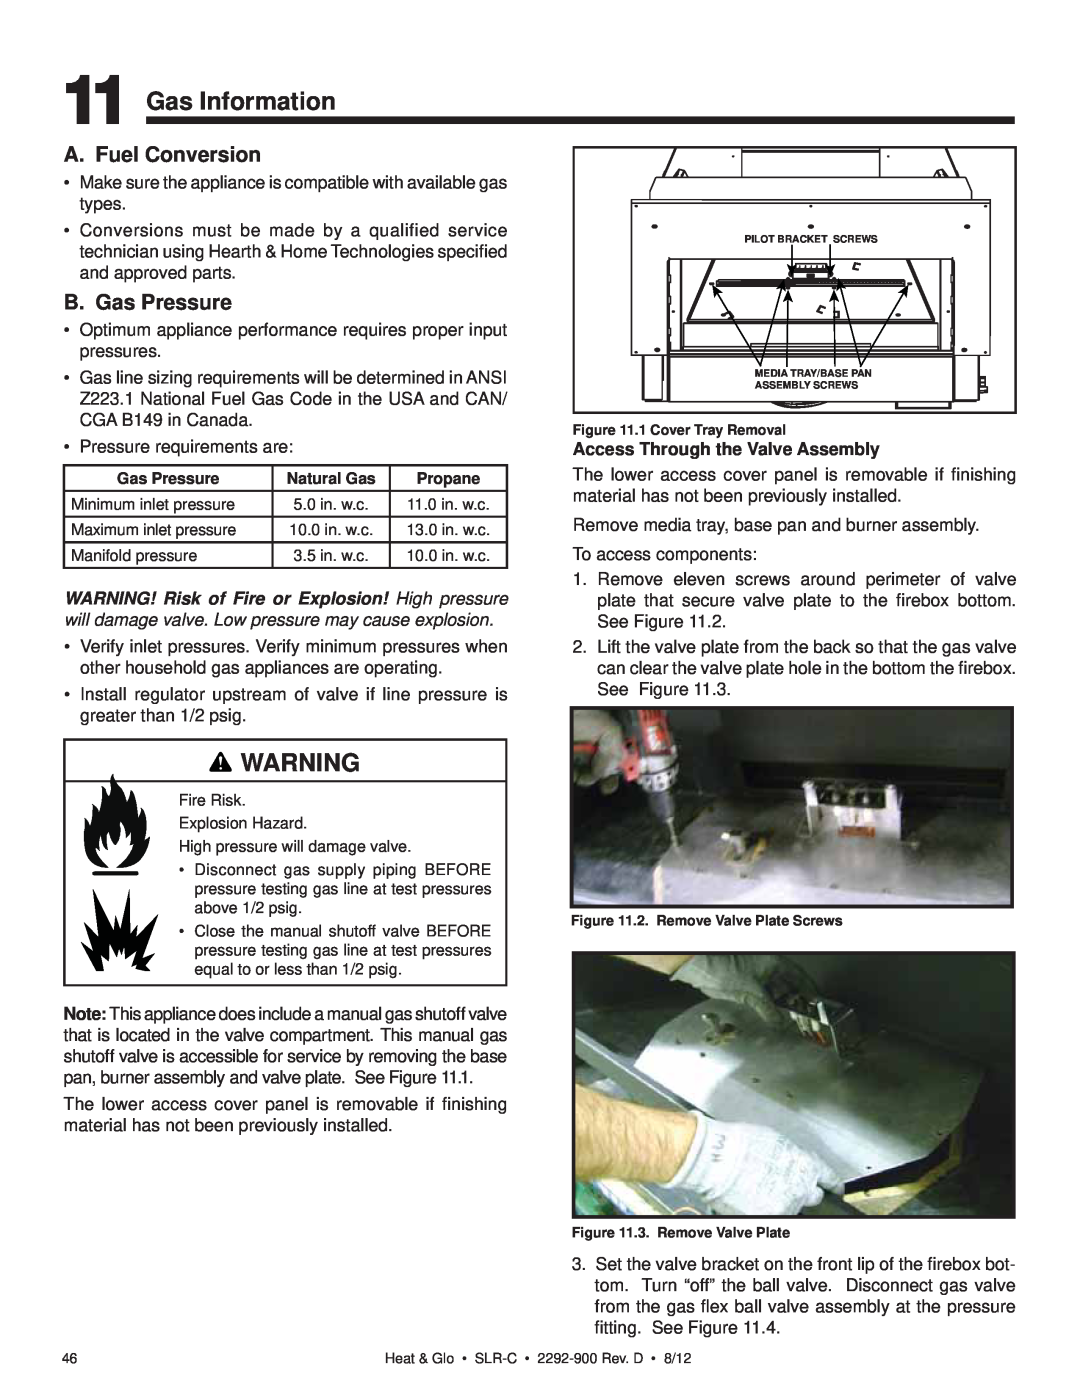 Heat & Glo LifeStyle SLR-C (COSMO) owner manual Gas Information, A. Fuel Conversion, B. Gas Pressure 